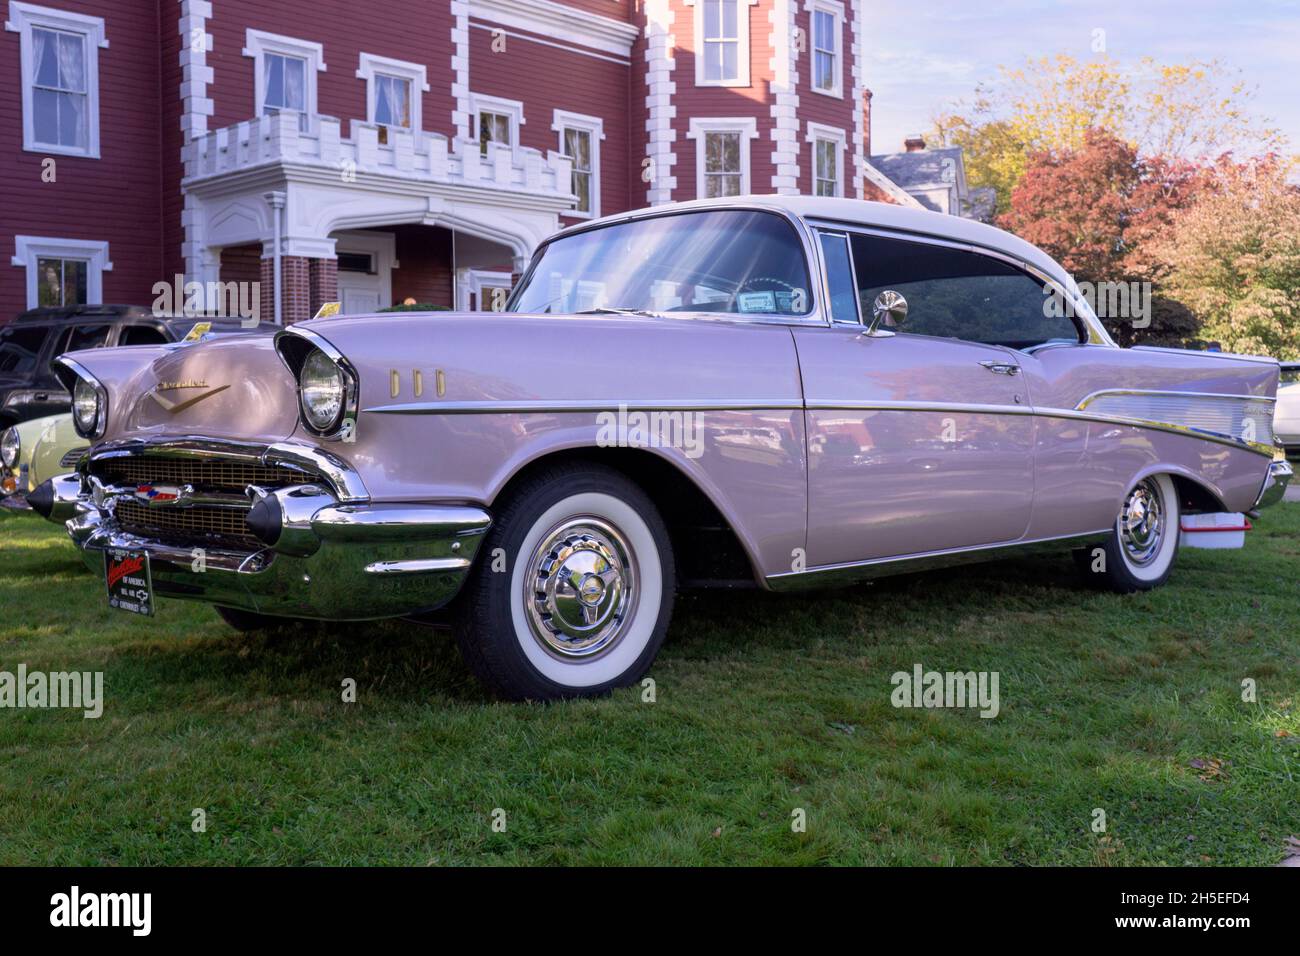 An antique 1957 Chevrolet Bel Air two door sedan parked outside the Bayside Historical Society in Queens at a vintage car show. Stock Photo